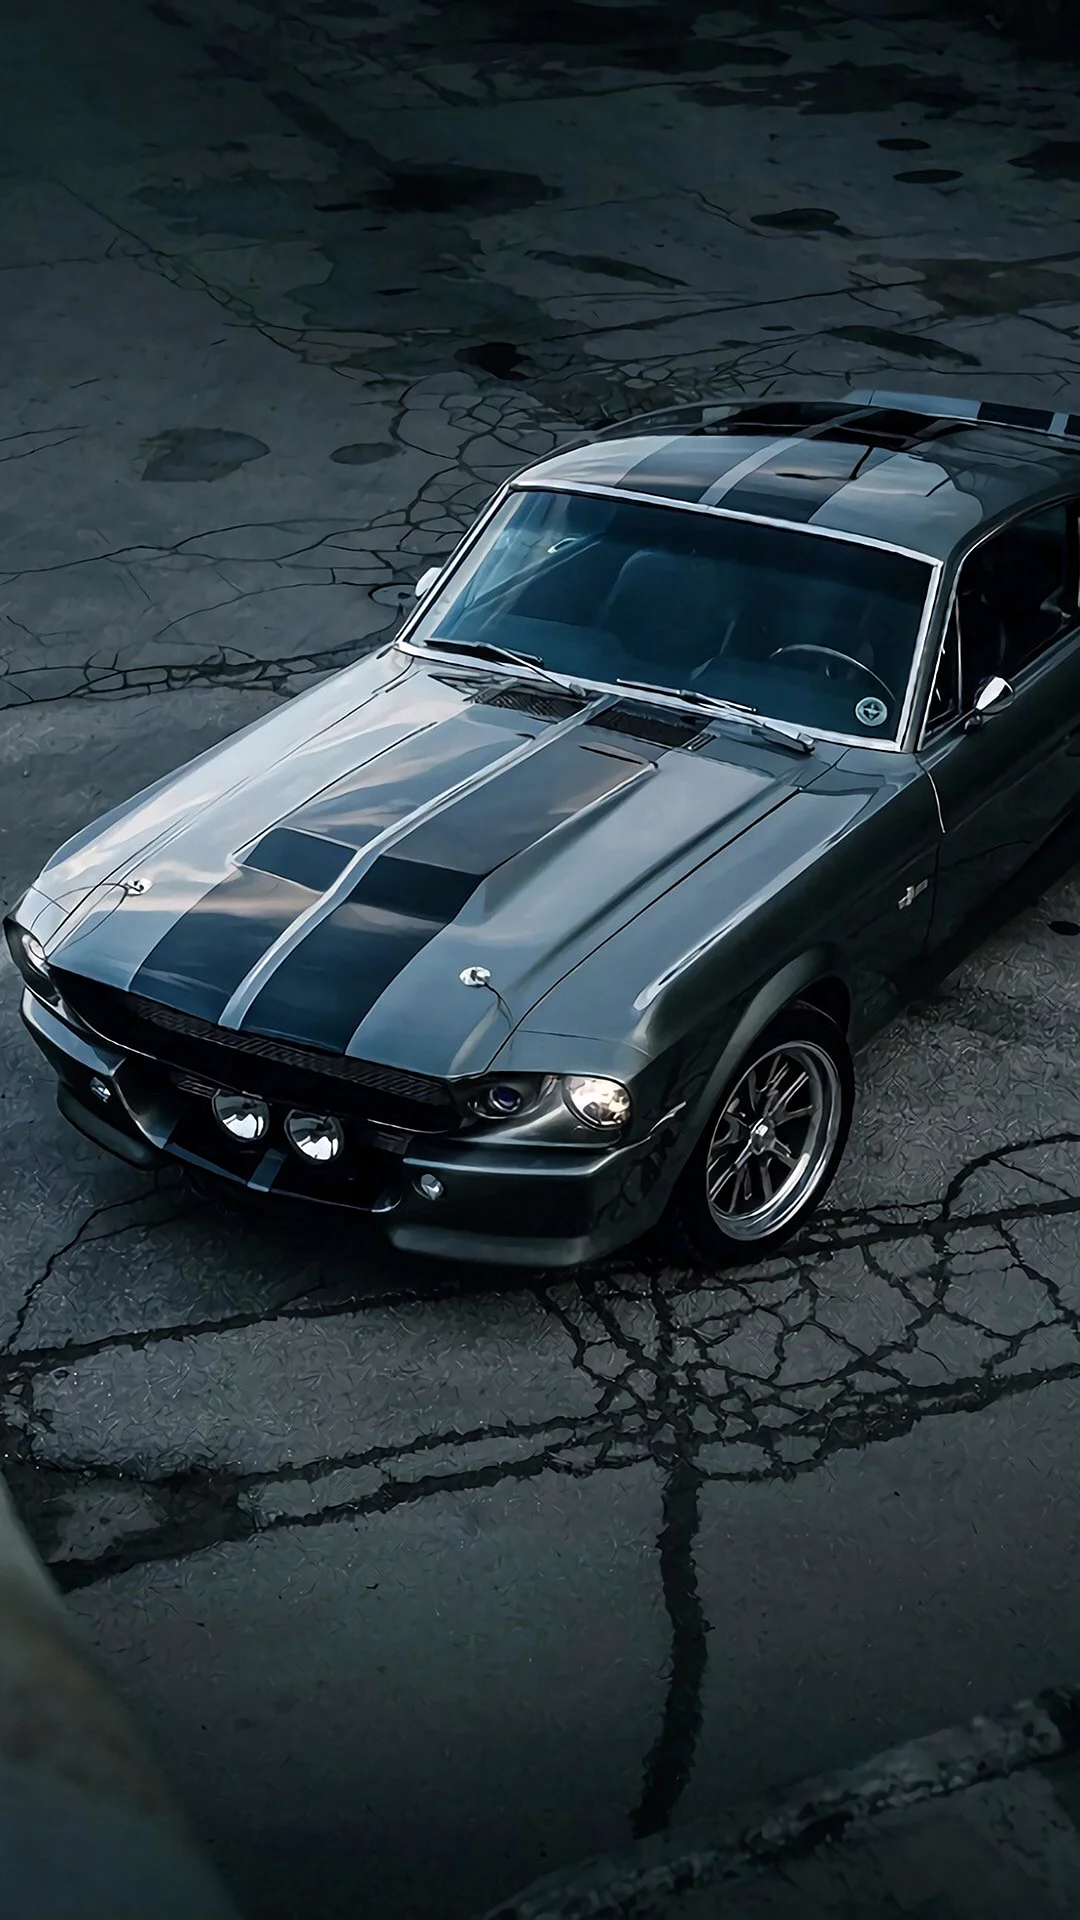 Ford Mustang 1967 Wallpaper For iPhone